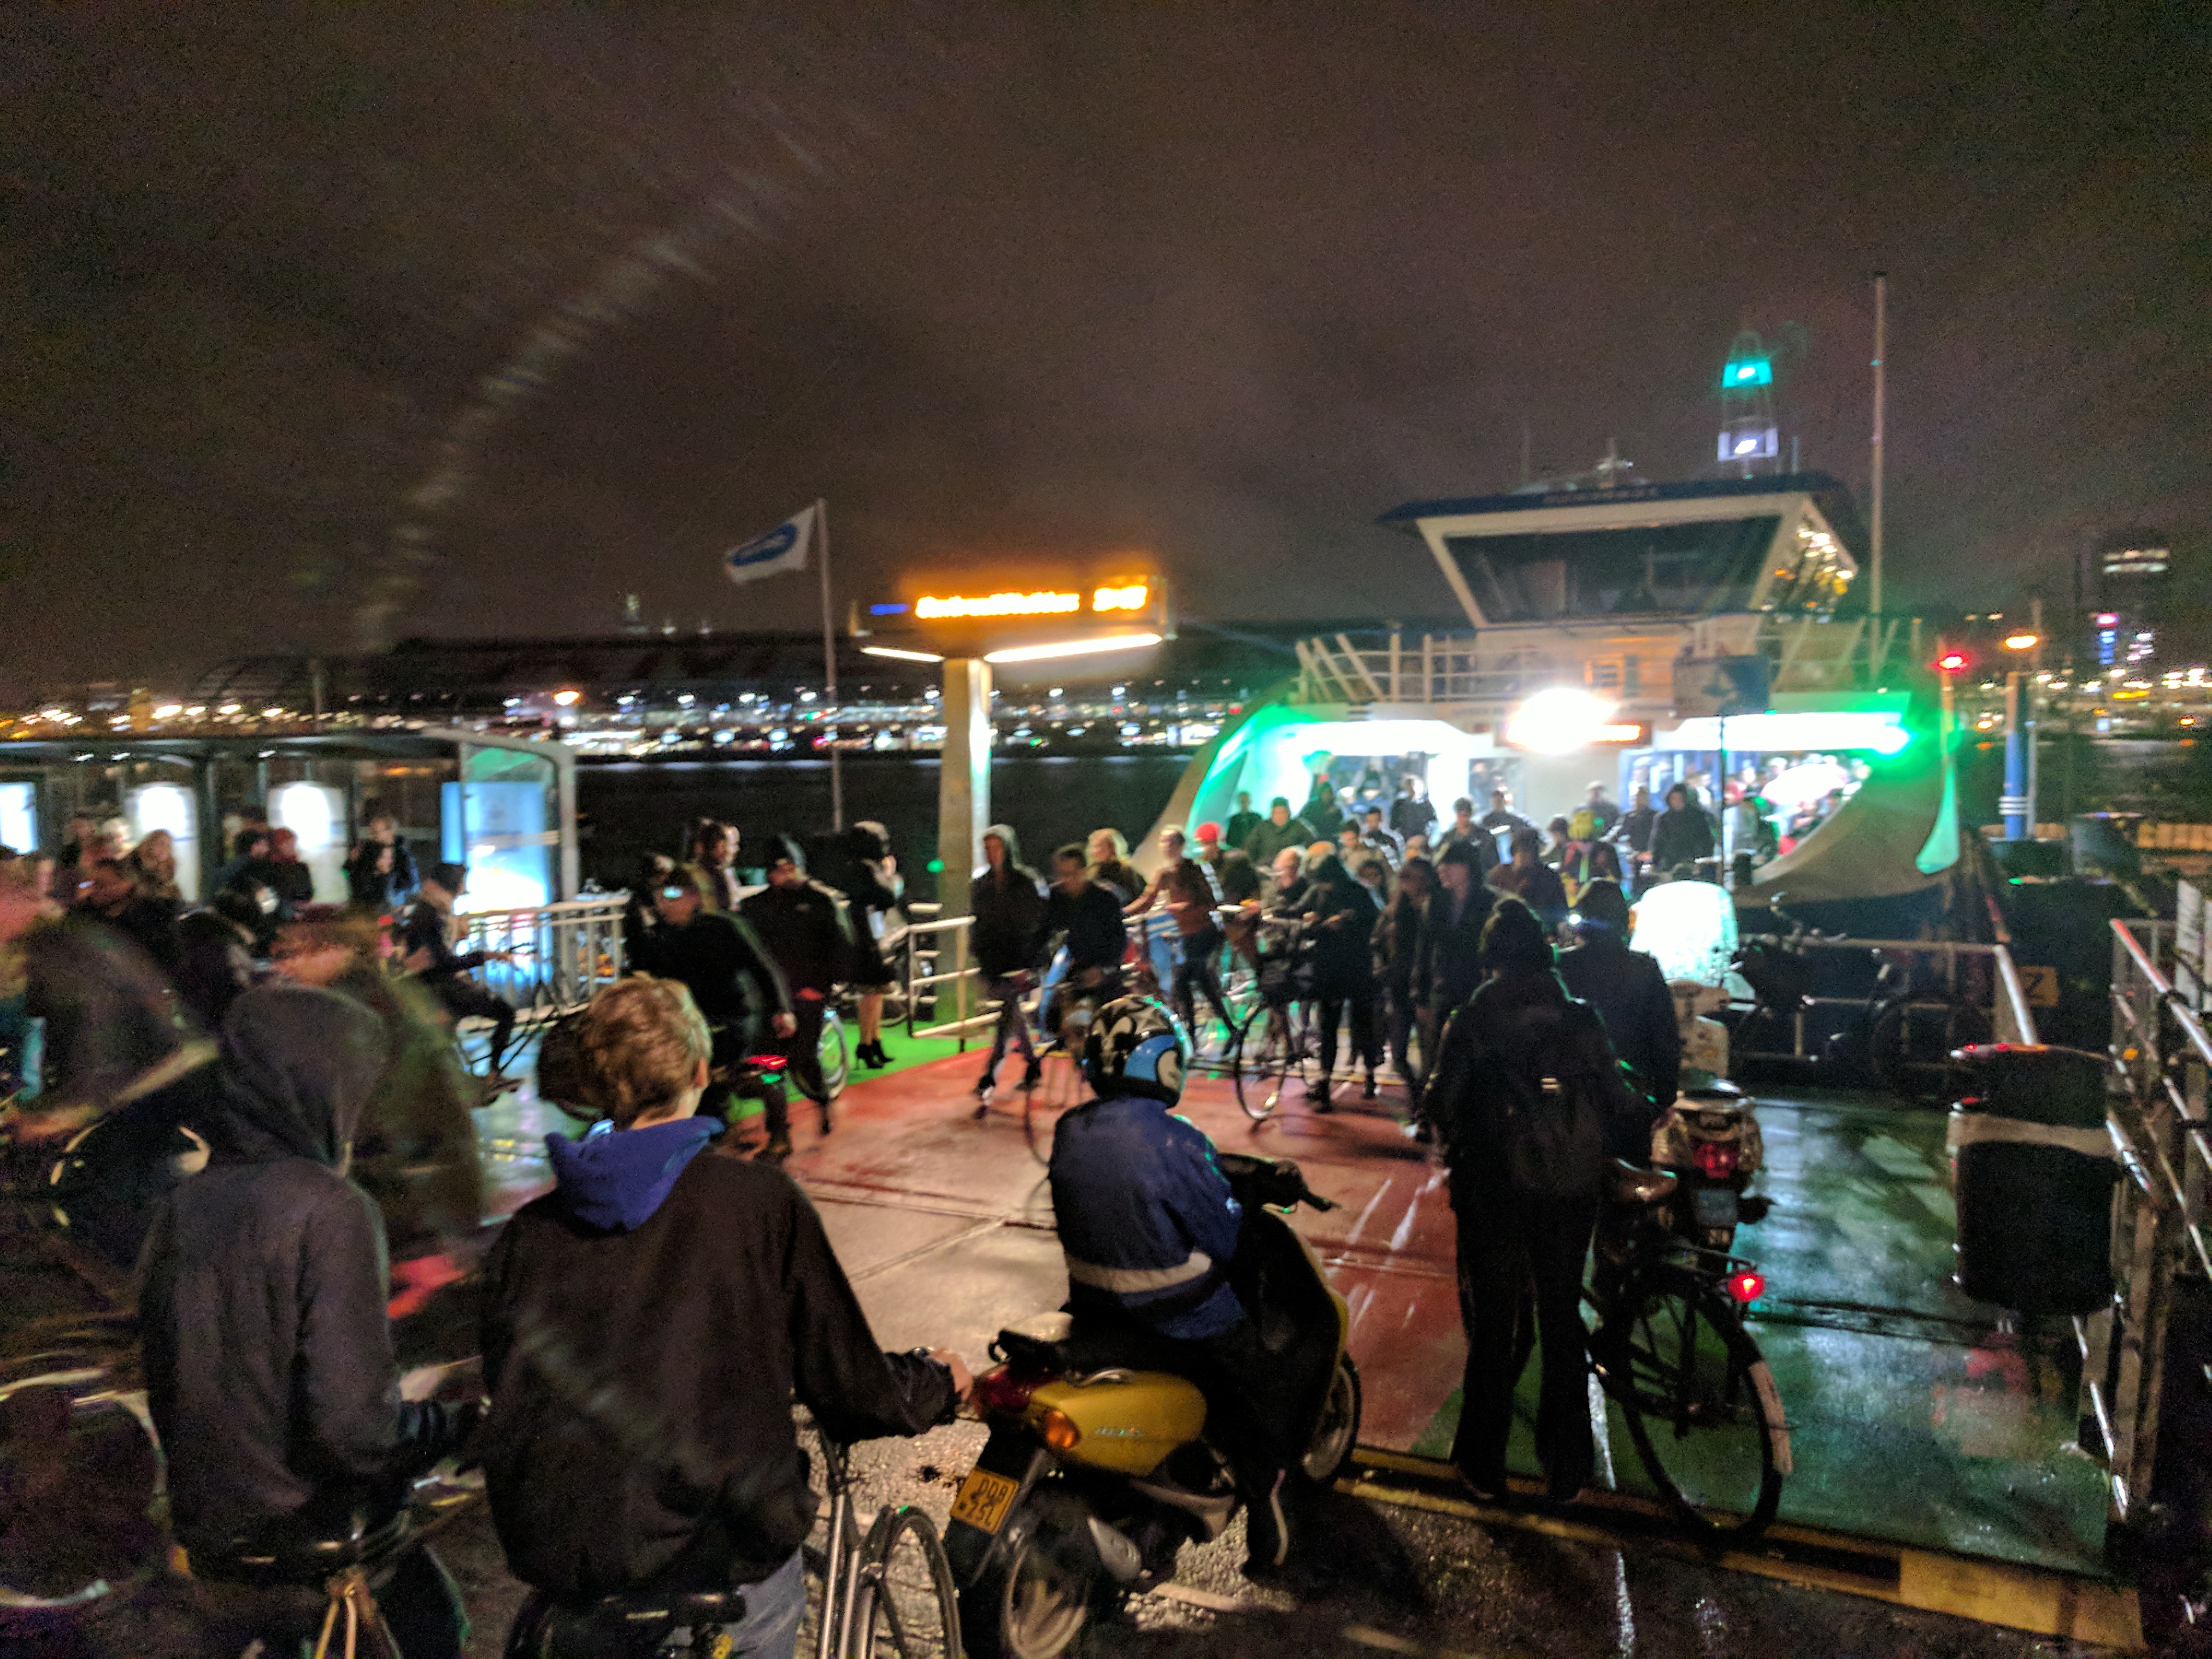 The ferry heading back to Amsterdam. The gates have just opened and a rush of people are getting off. There are approximately six billion people on bikes and scooters waiting to board.